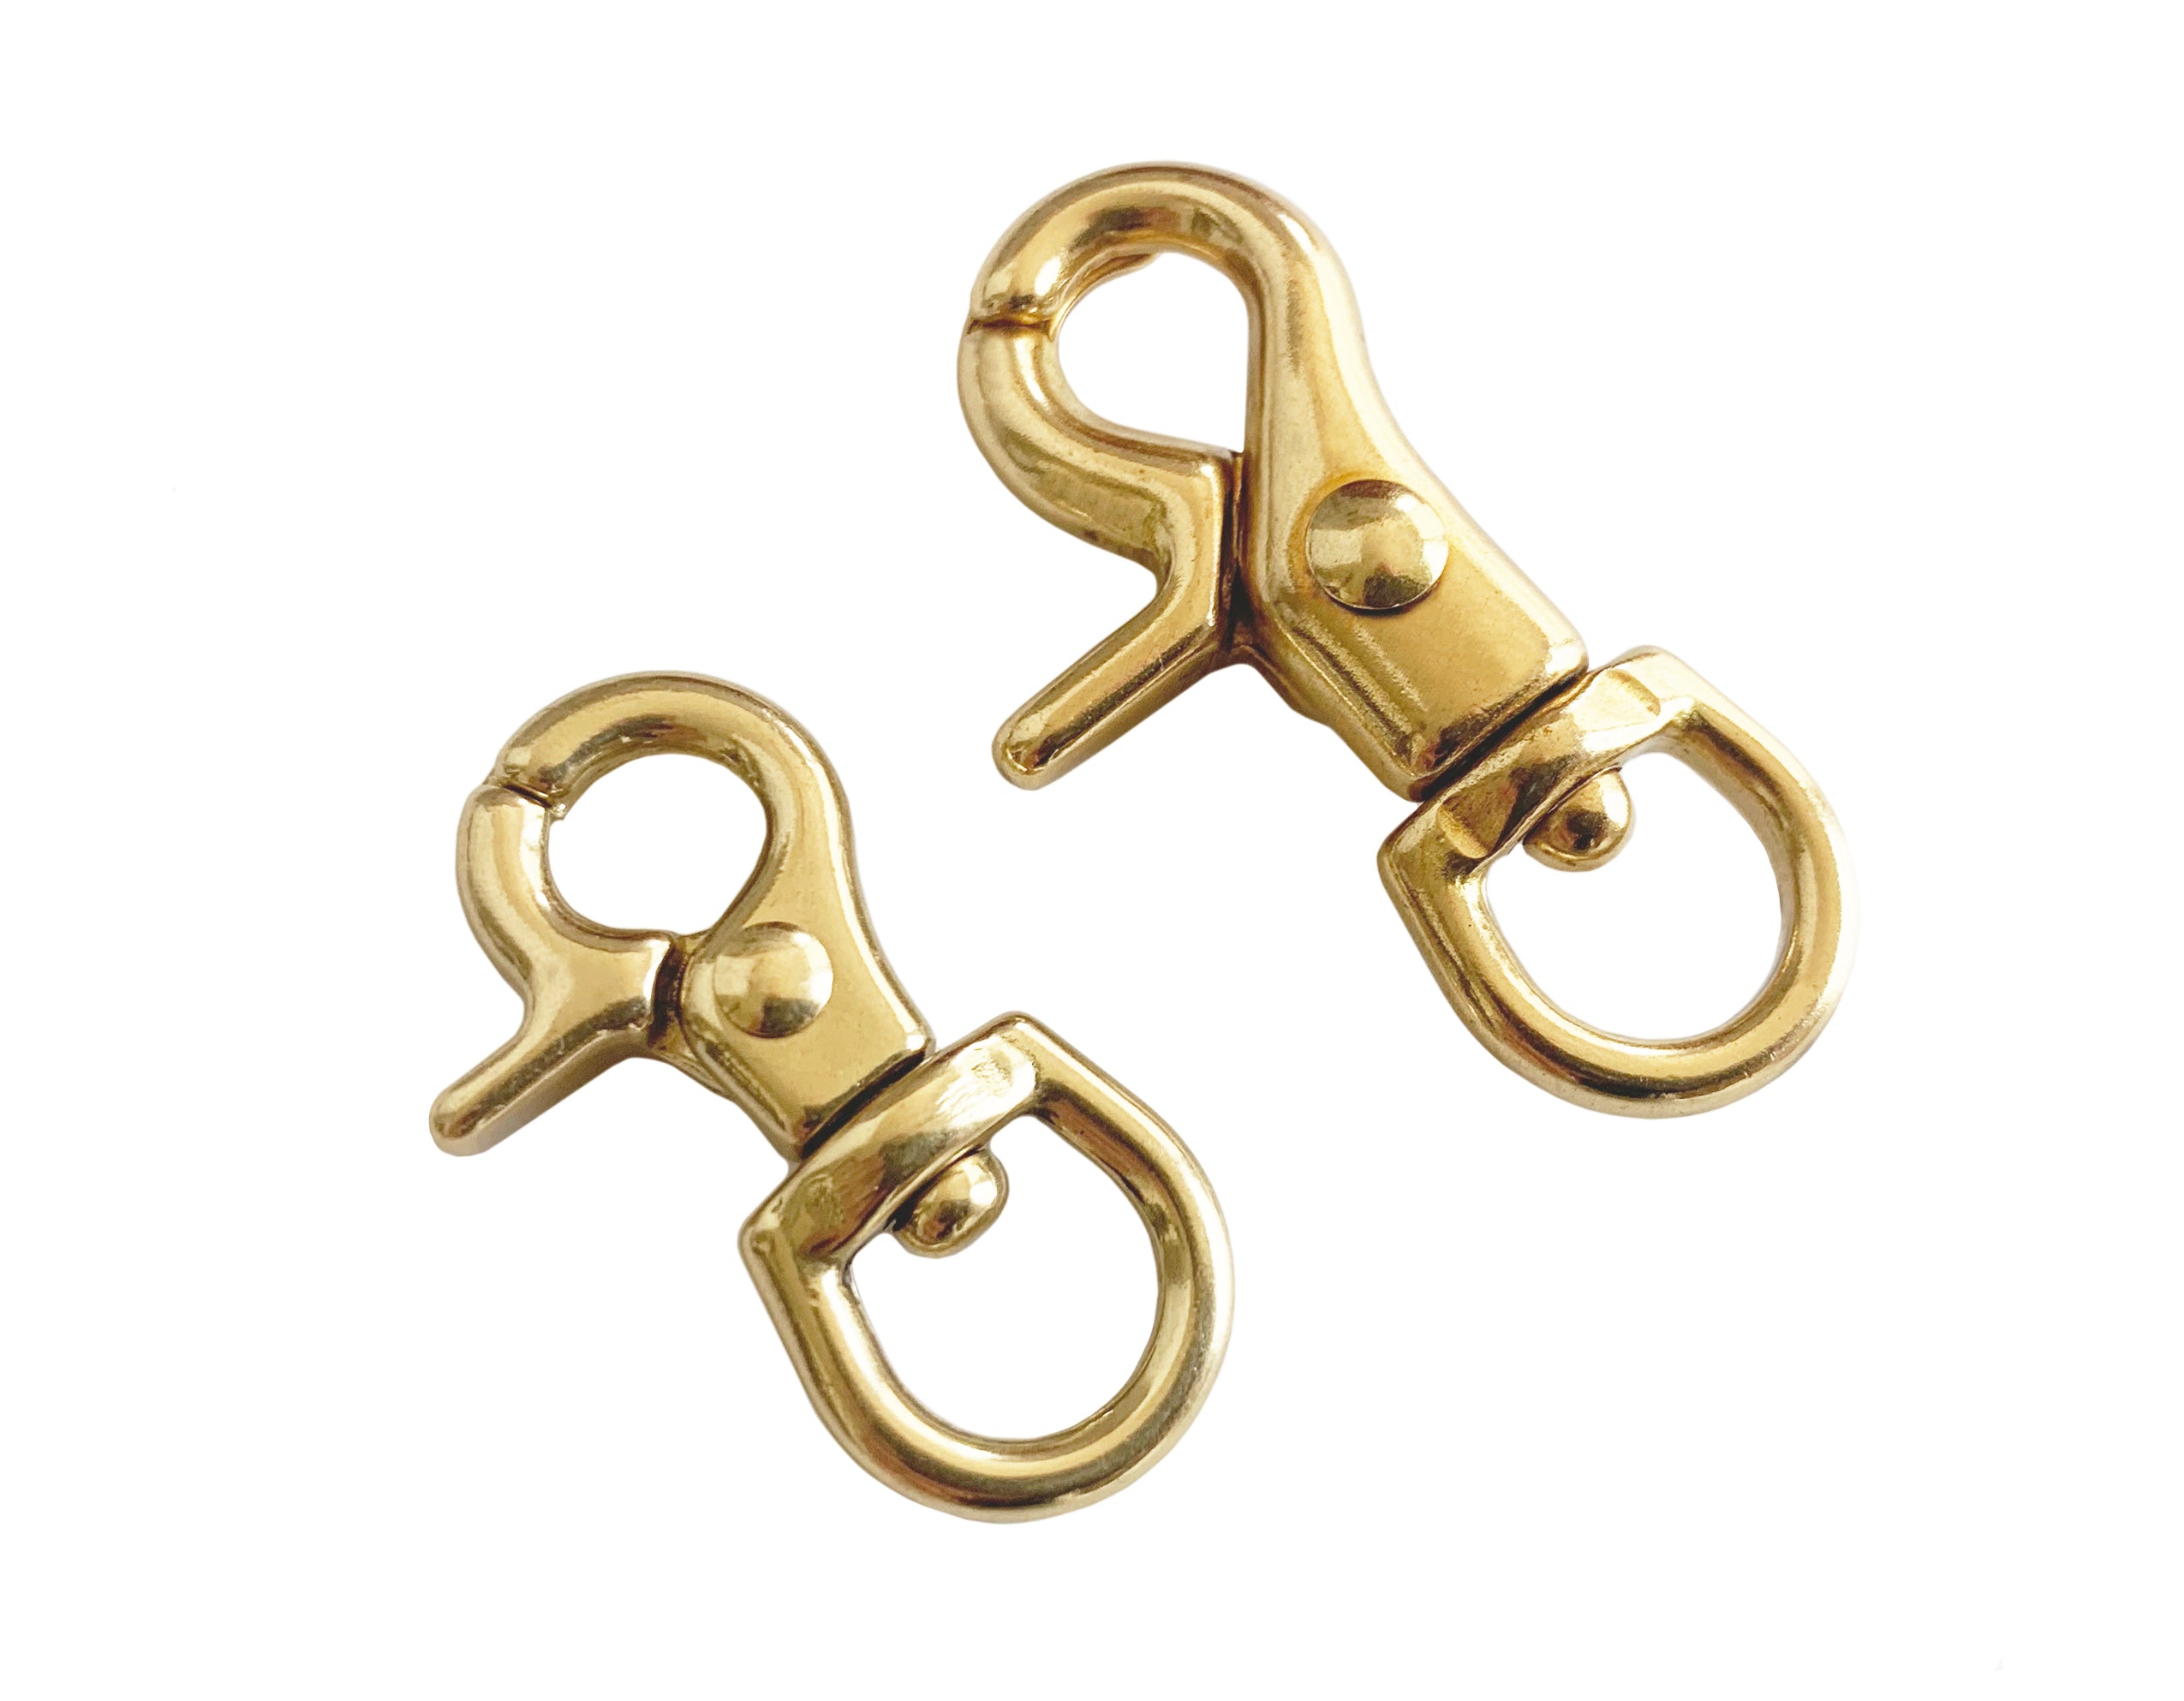 10pcs Metal Swivel Snap Hook Lobster Claw Clasp,9mm and 13mm